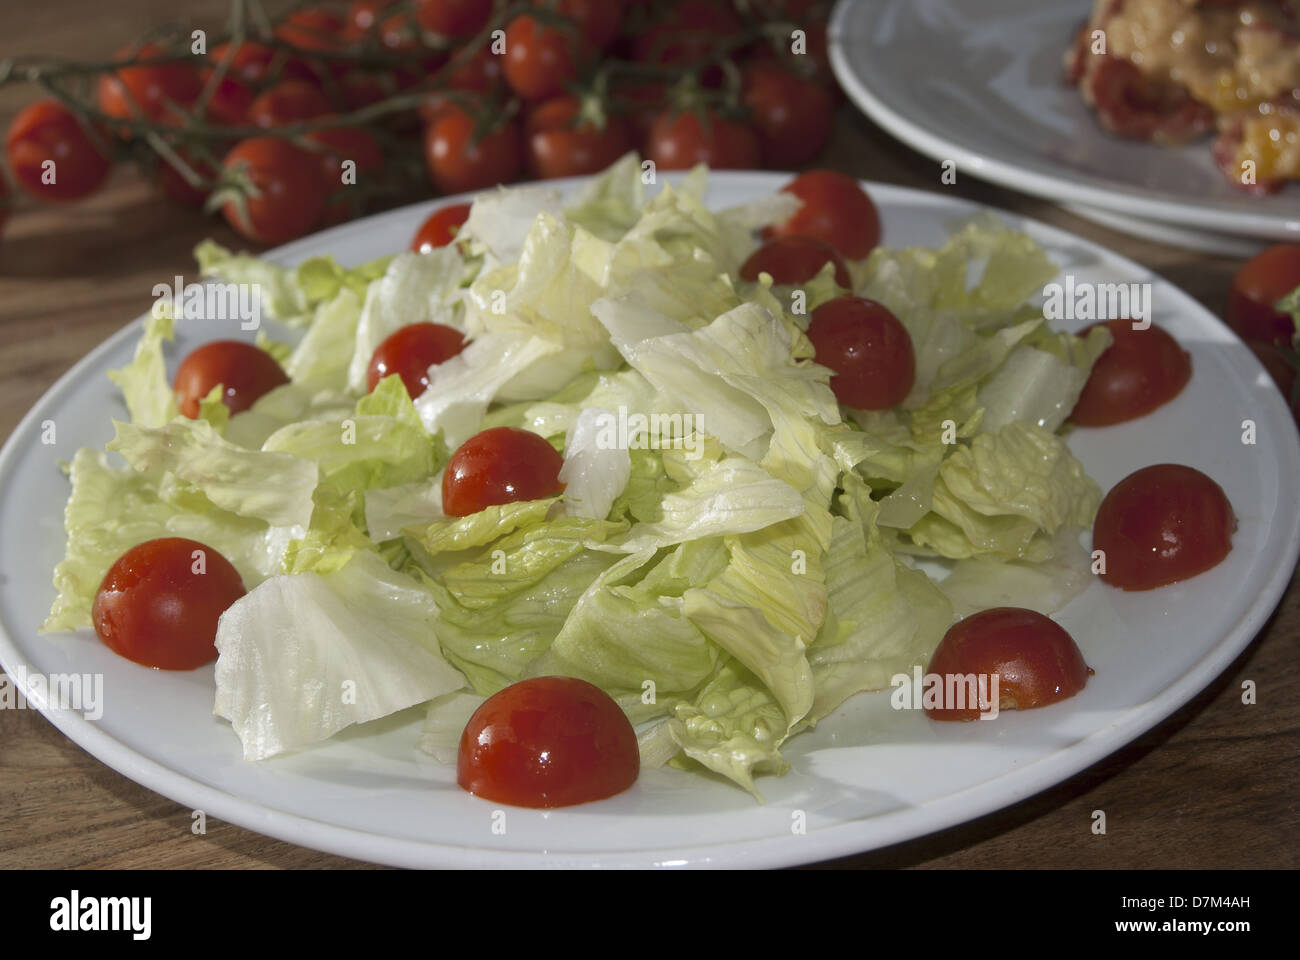 lettuce salad with pachino tomatoes, a healthy vegetarian meal Stock Photo